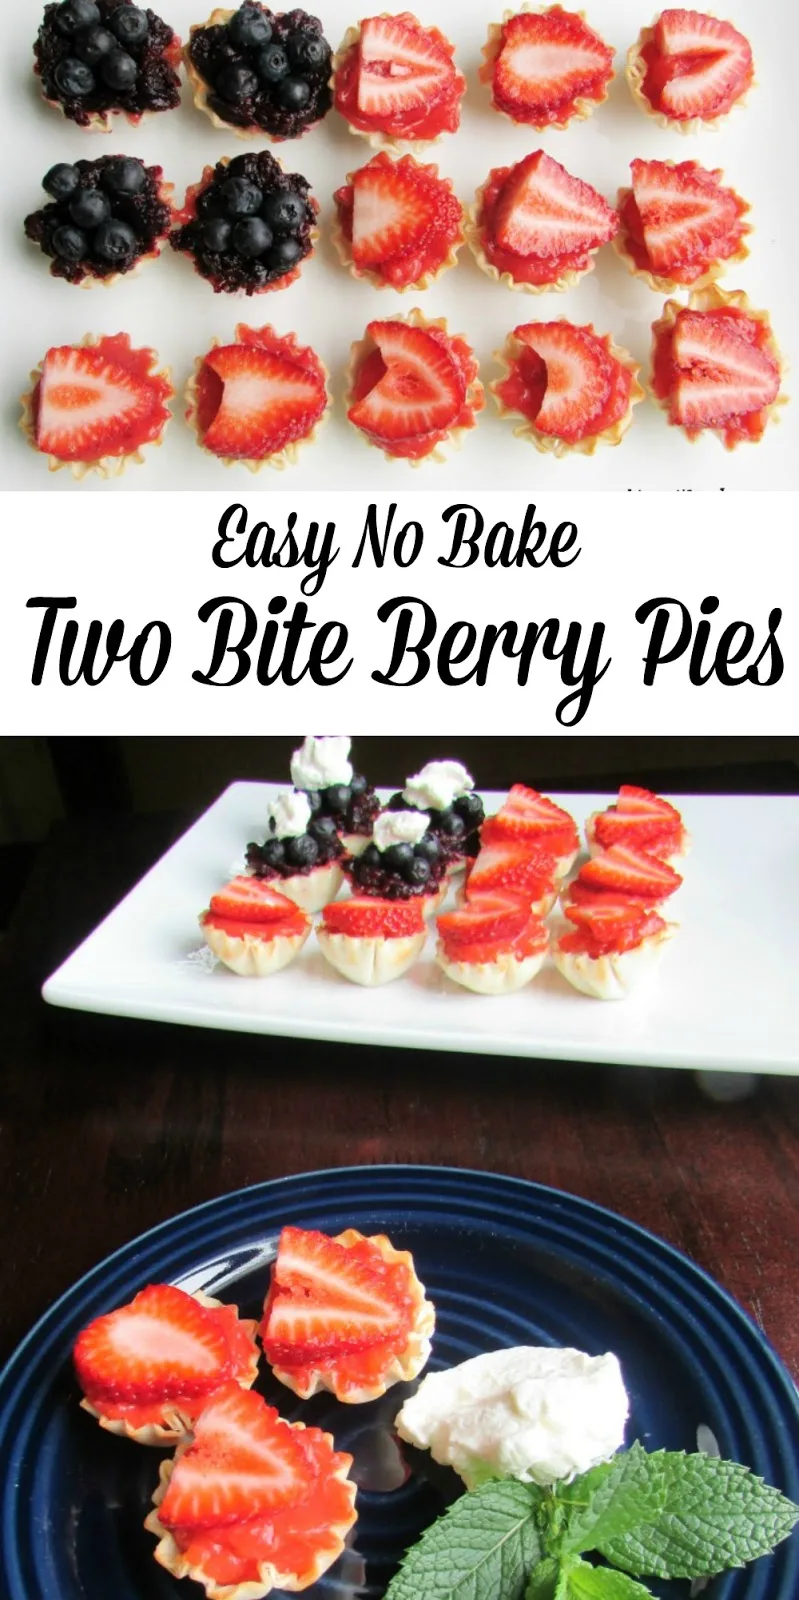 These Two Bite Pies are perfect for Memorial Day, the 4th of July or any summer BBQ or potluck. Make the filling ahead of time for a great easy treat!